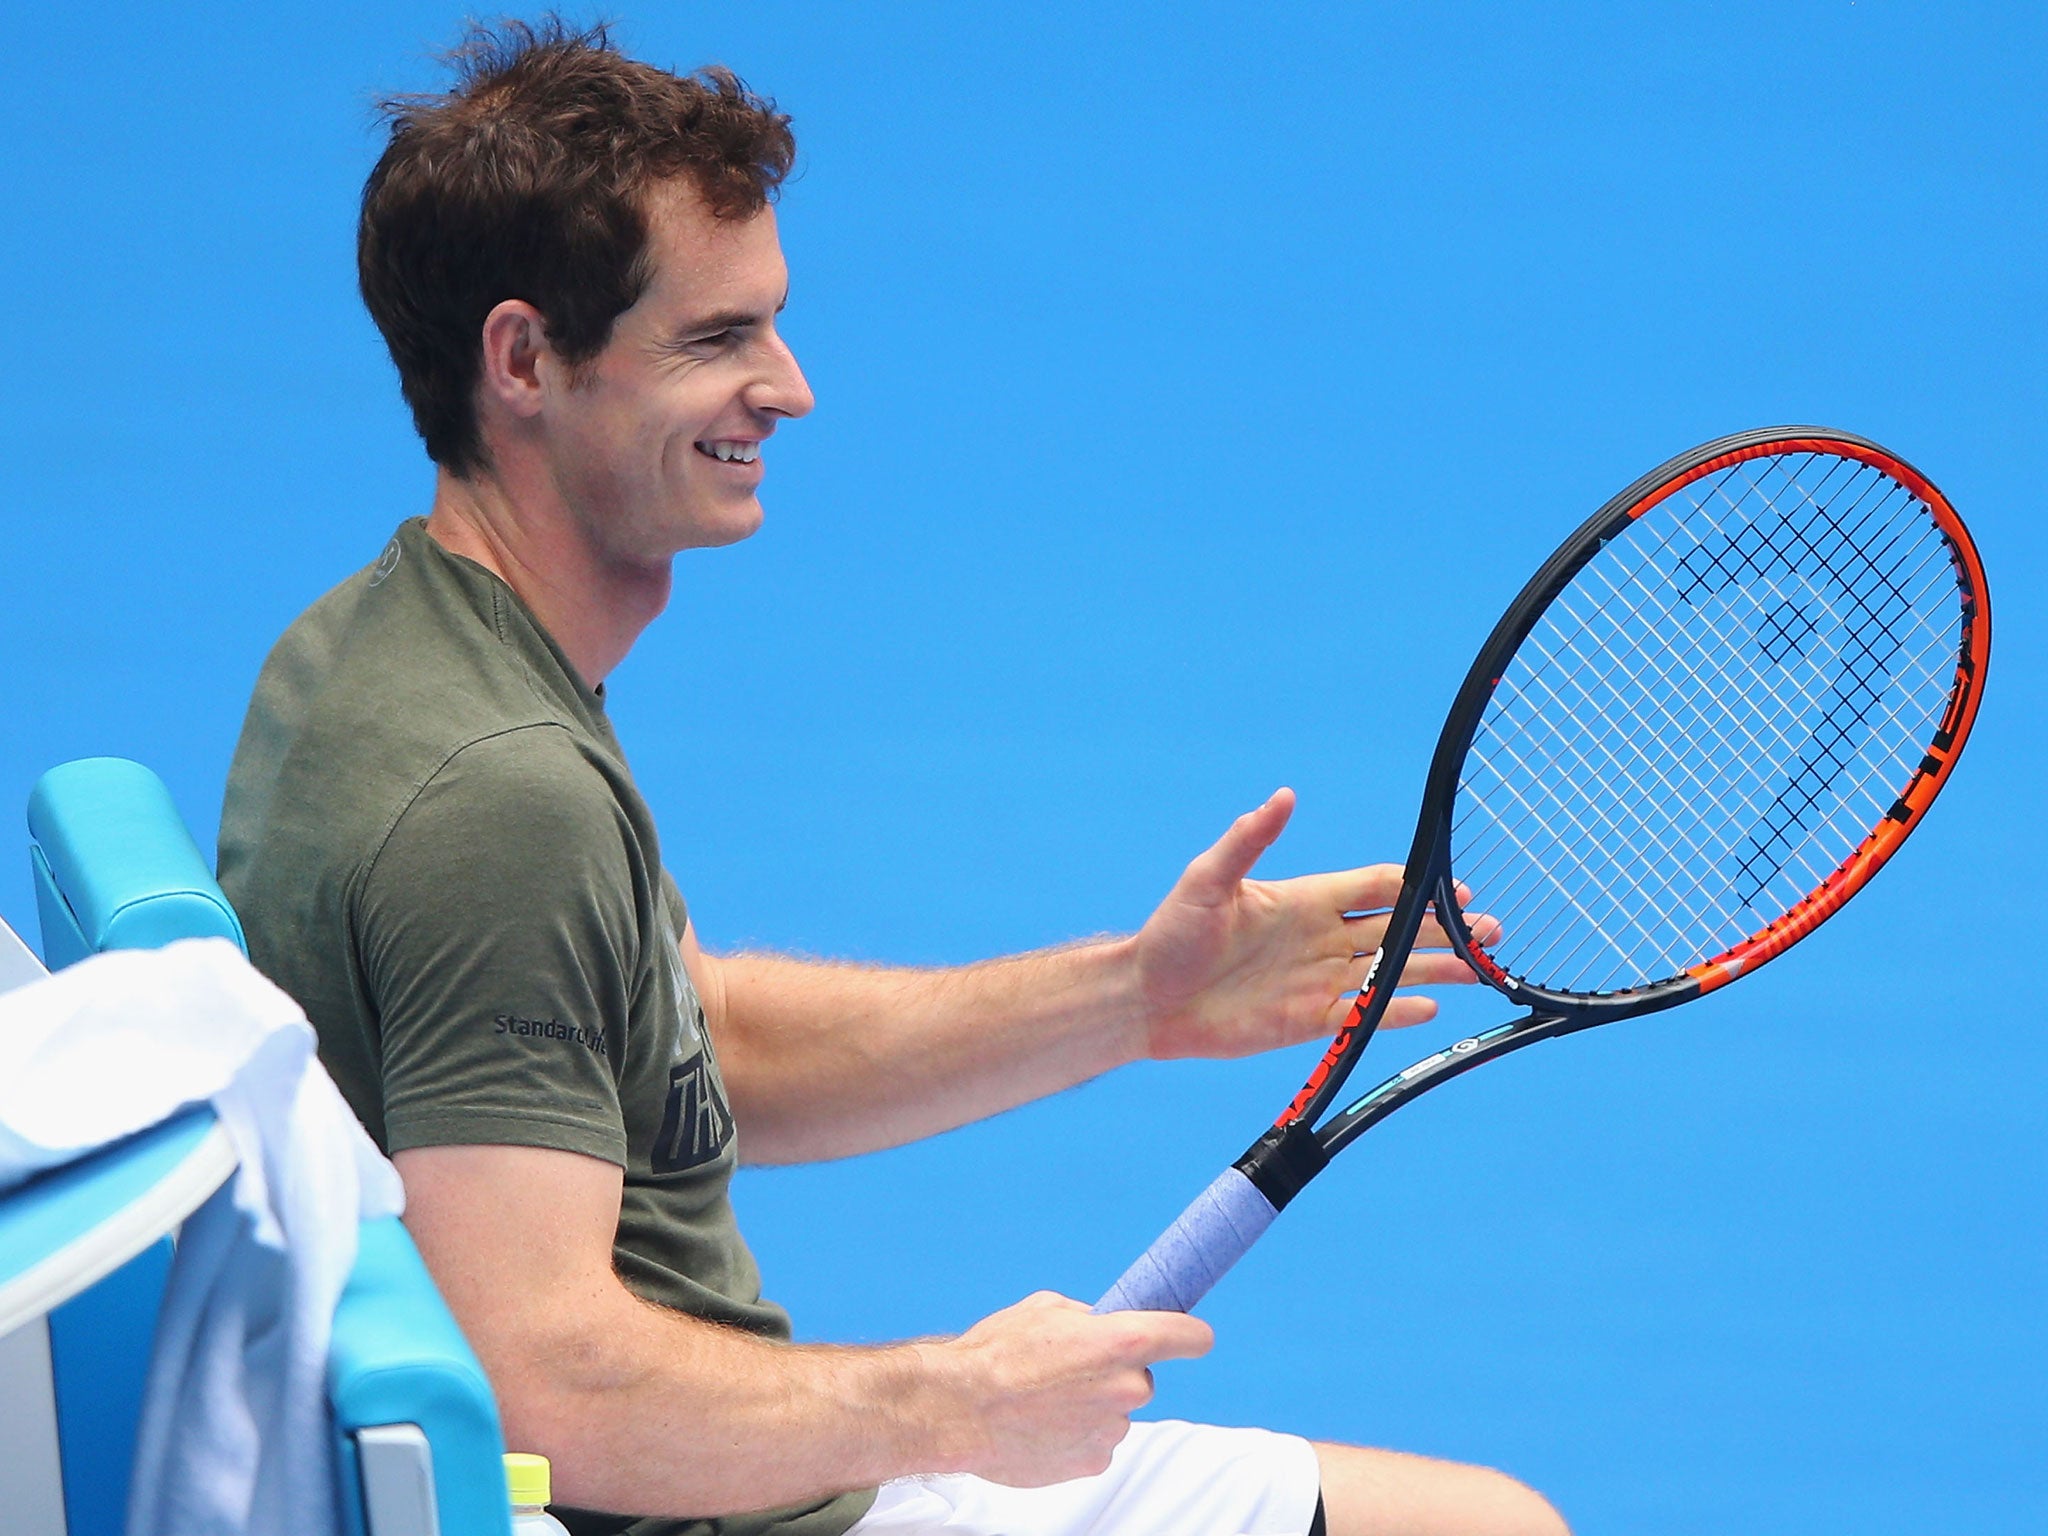 Andy Murray will face Germany's Alexander Zverev in the Australian Open first round